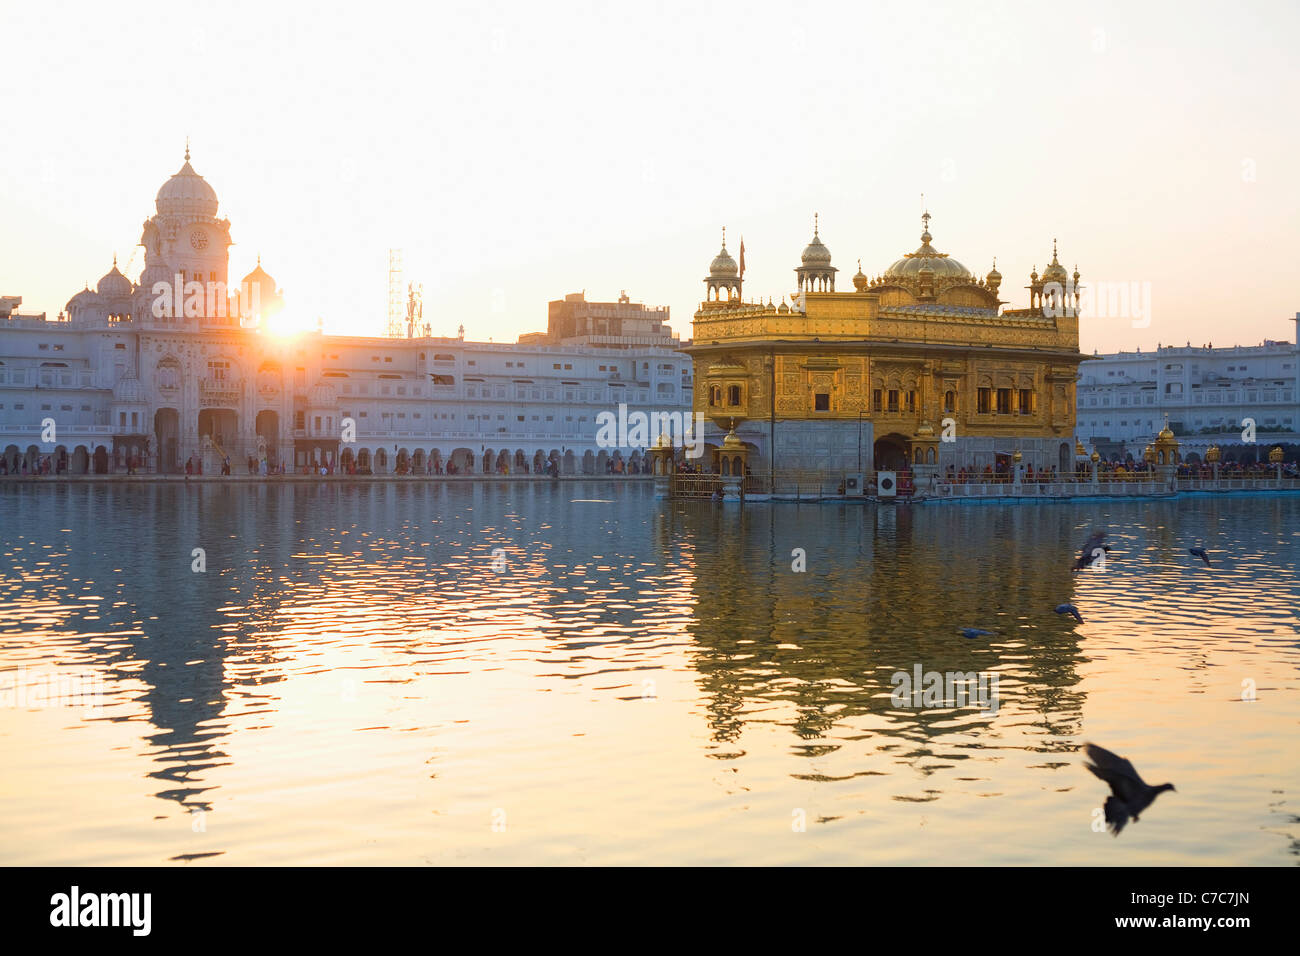 Sunrise at the Sikh Golden Temple in the city of Amritsar, India ...